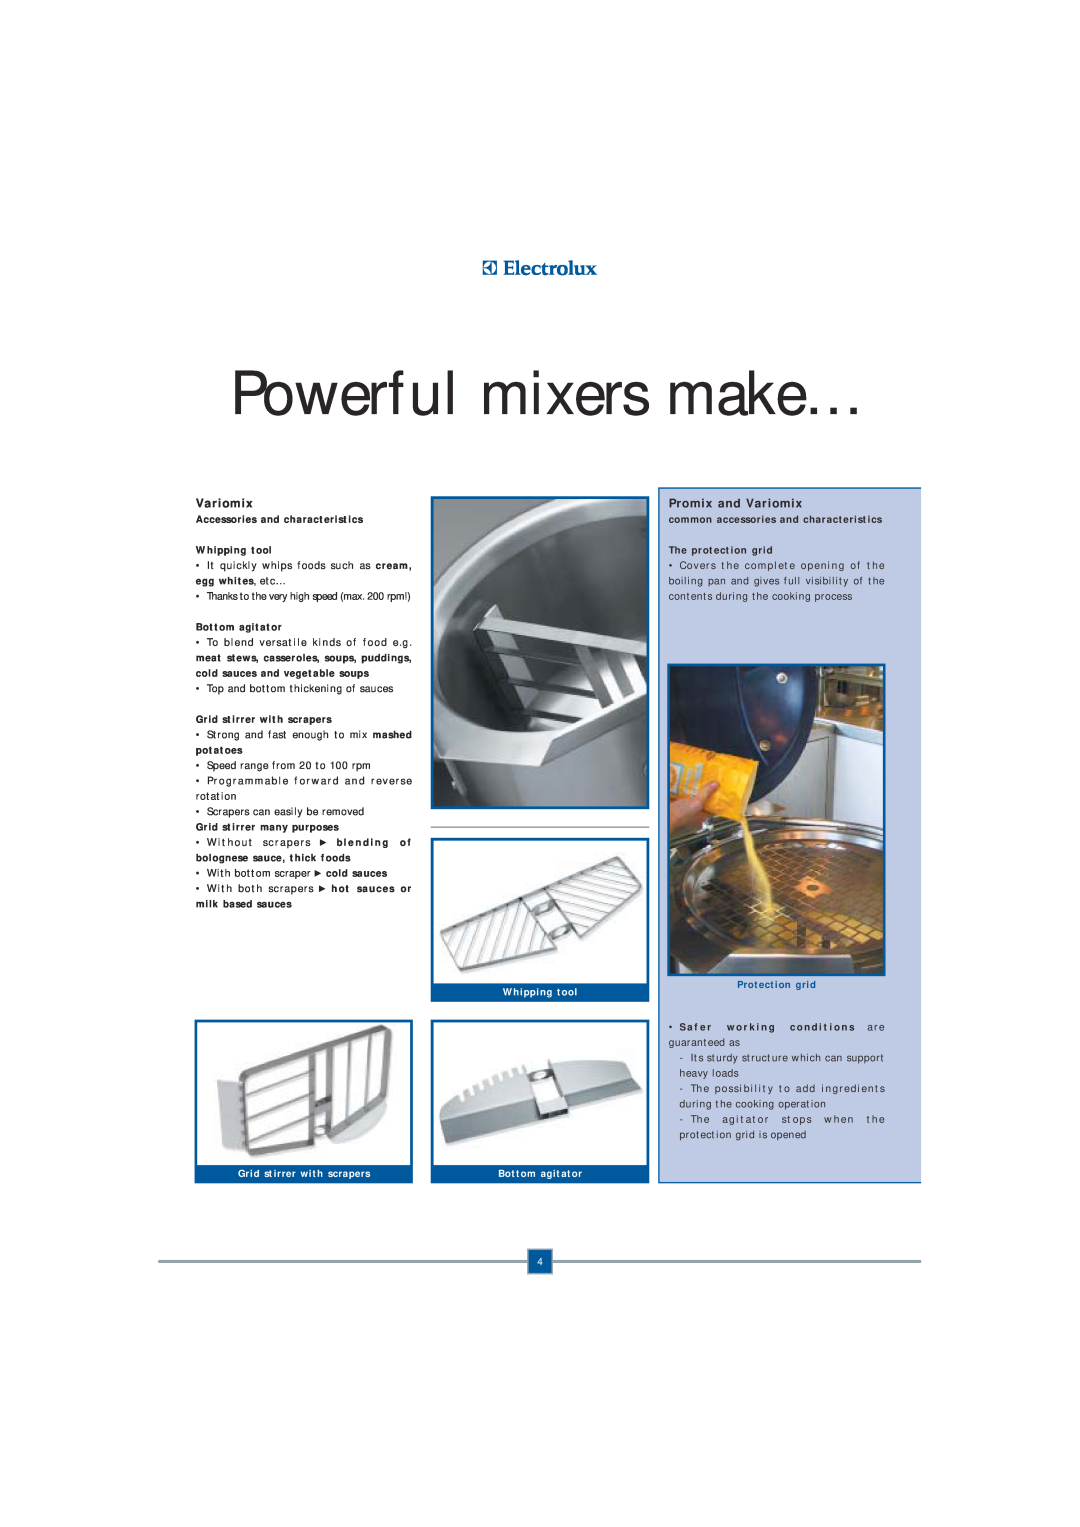 Electrolux Fryer manual Powerful mixers make…, Promix and Variomix, Accessories and characteristics Whipping tool 